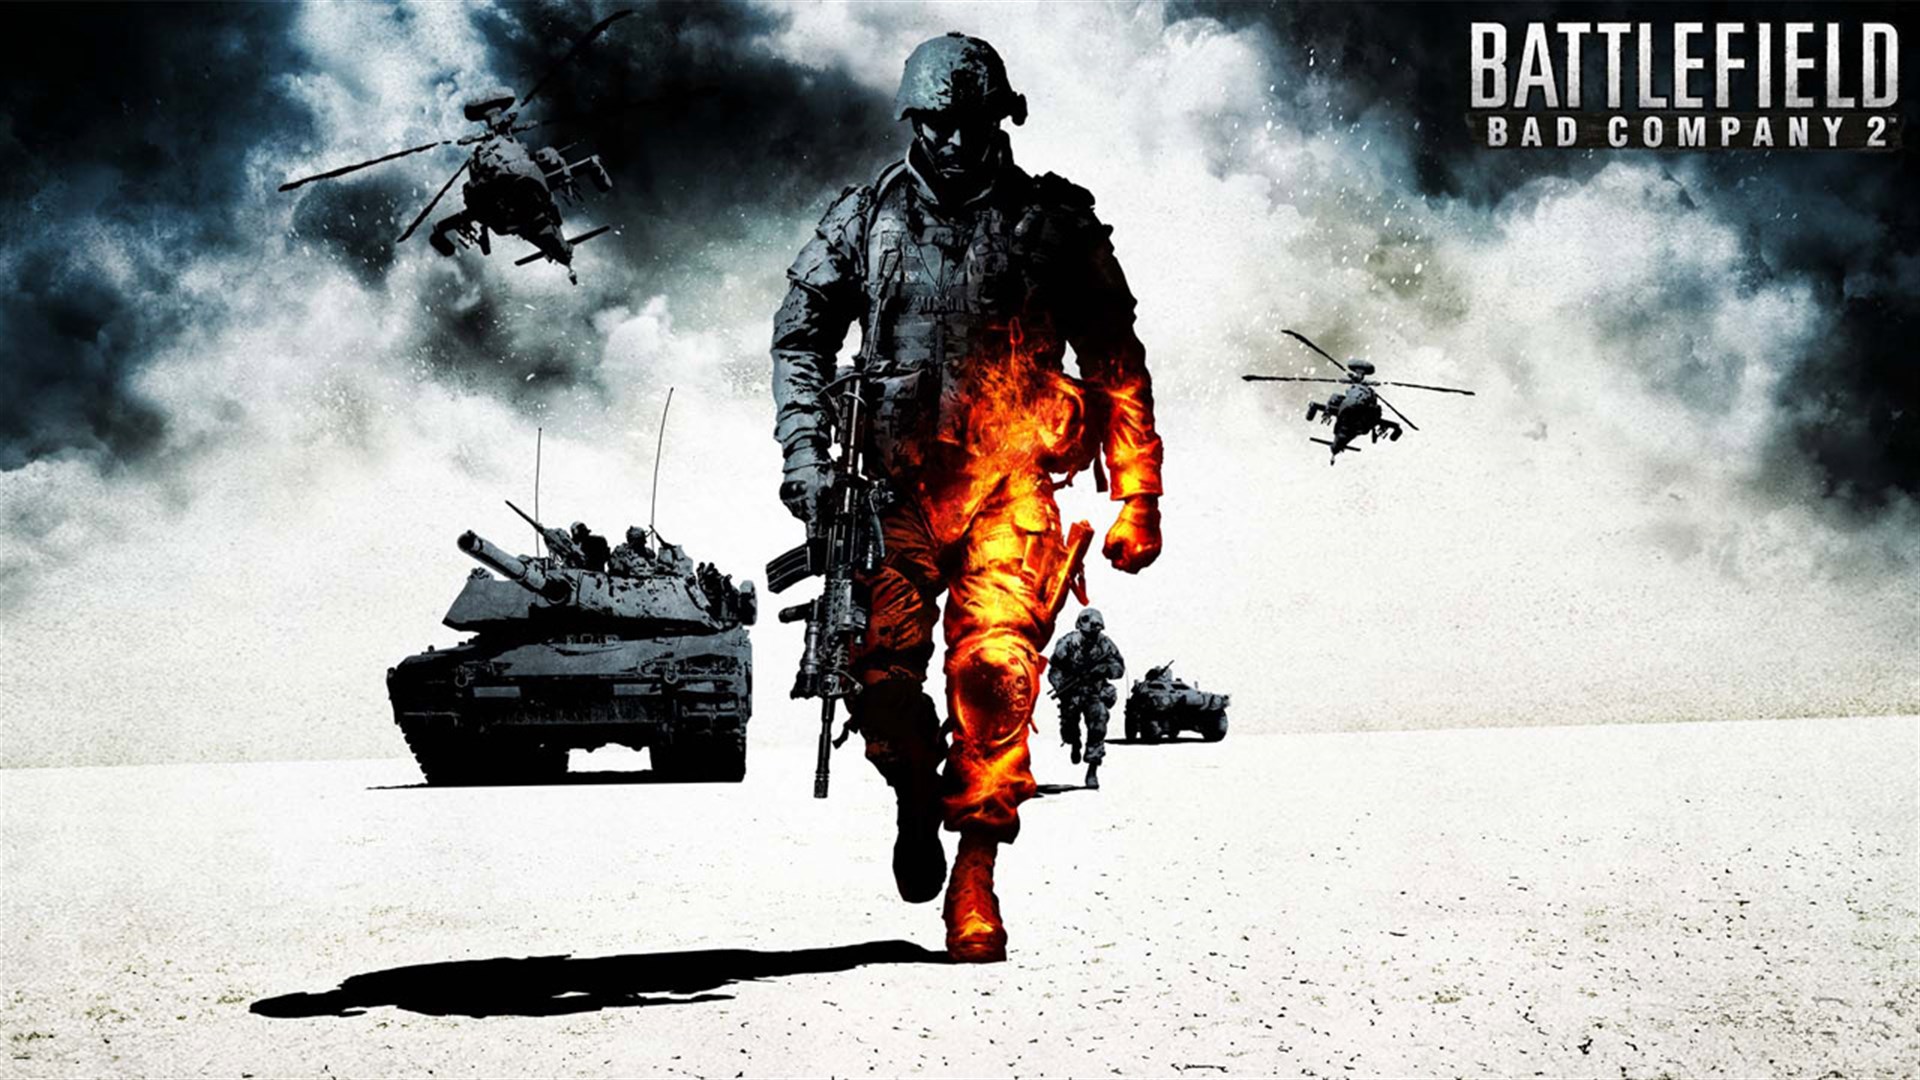 apps.63302.65628509847869758.24669e03 5410 4b63 9a5b c6982ad66661 Download Battlefield bad company 2 for PC